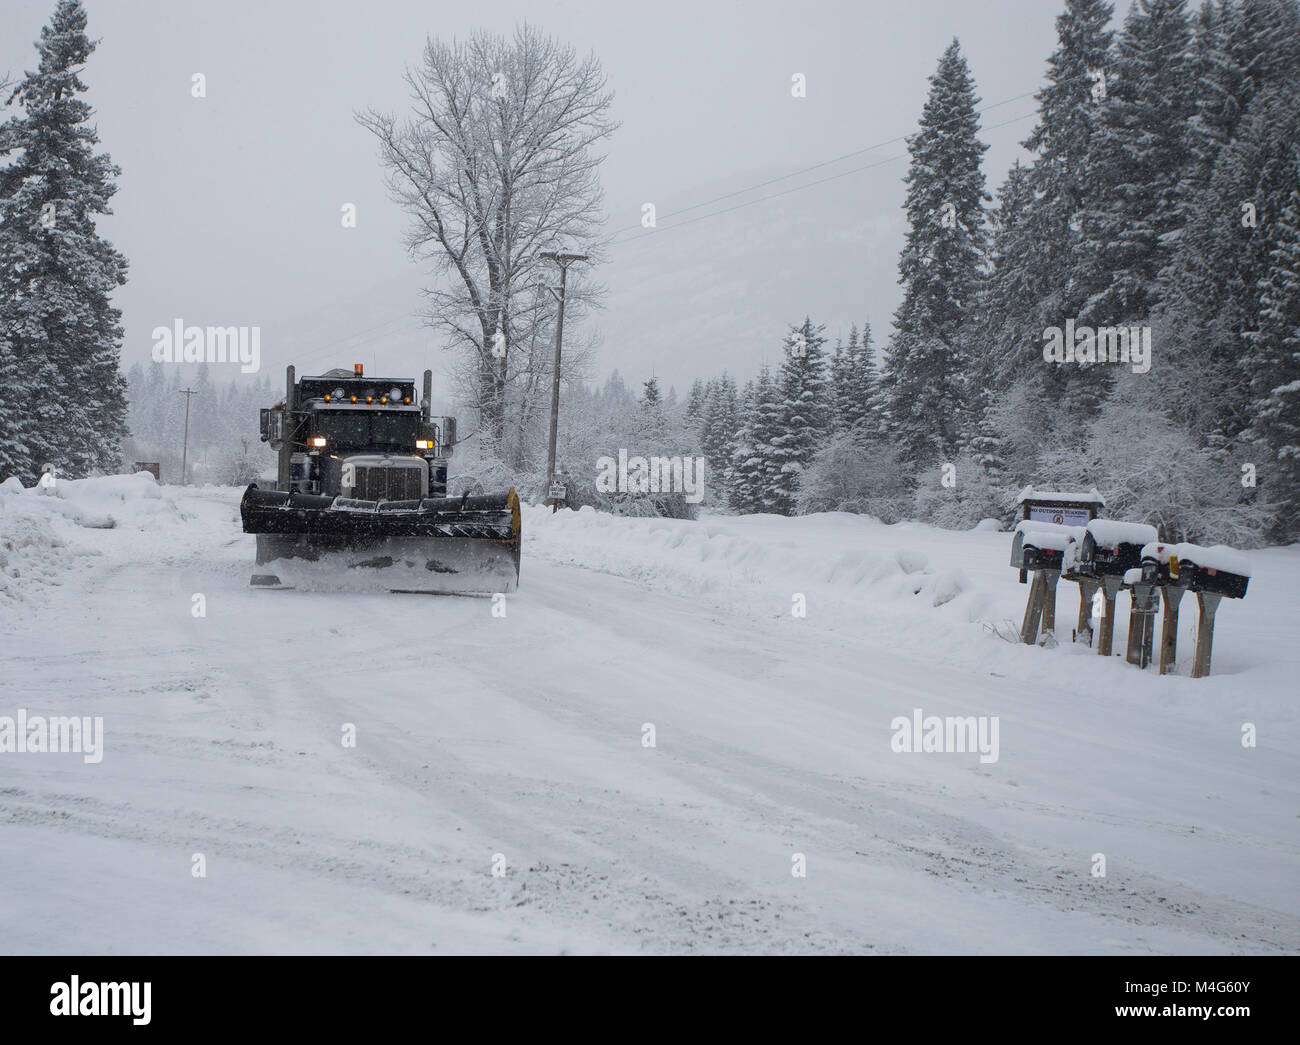 Sanders County, Montana, USA. 16th Feb, 2018. Snow event. Snow storm. A tandem axle Peterbuilt snow plow truck plowing the snow and sanding the road on the South Fork of Bull River Road, near the intersection of Hiway 56, Bull Lake Road, in Sanders County, Montana. The raod is located in a remote section of the Cabinet Mountains, about 20 miles north of Noxon, Montana. The area is being hit with heavy snow, coming in from the west. The storm should last several days. Credit: Martin Battilana Photography - Alamy/Alamy Live News Stock Photo